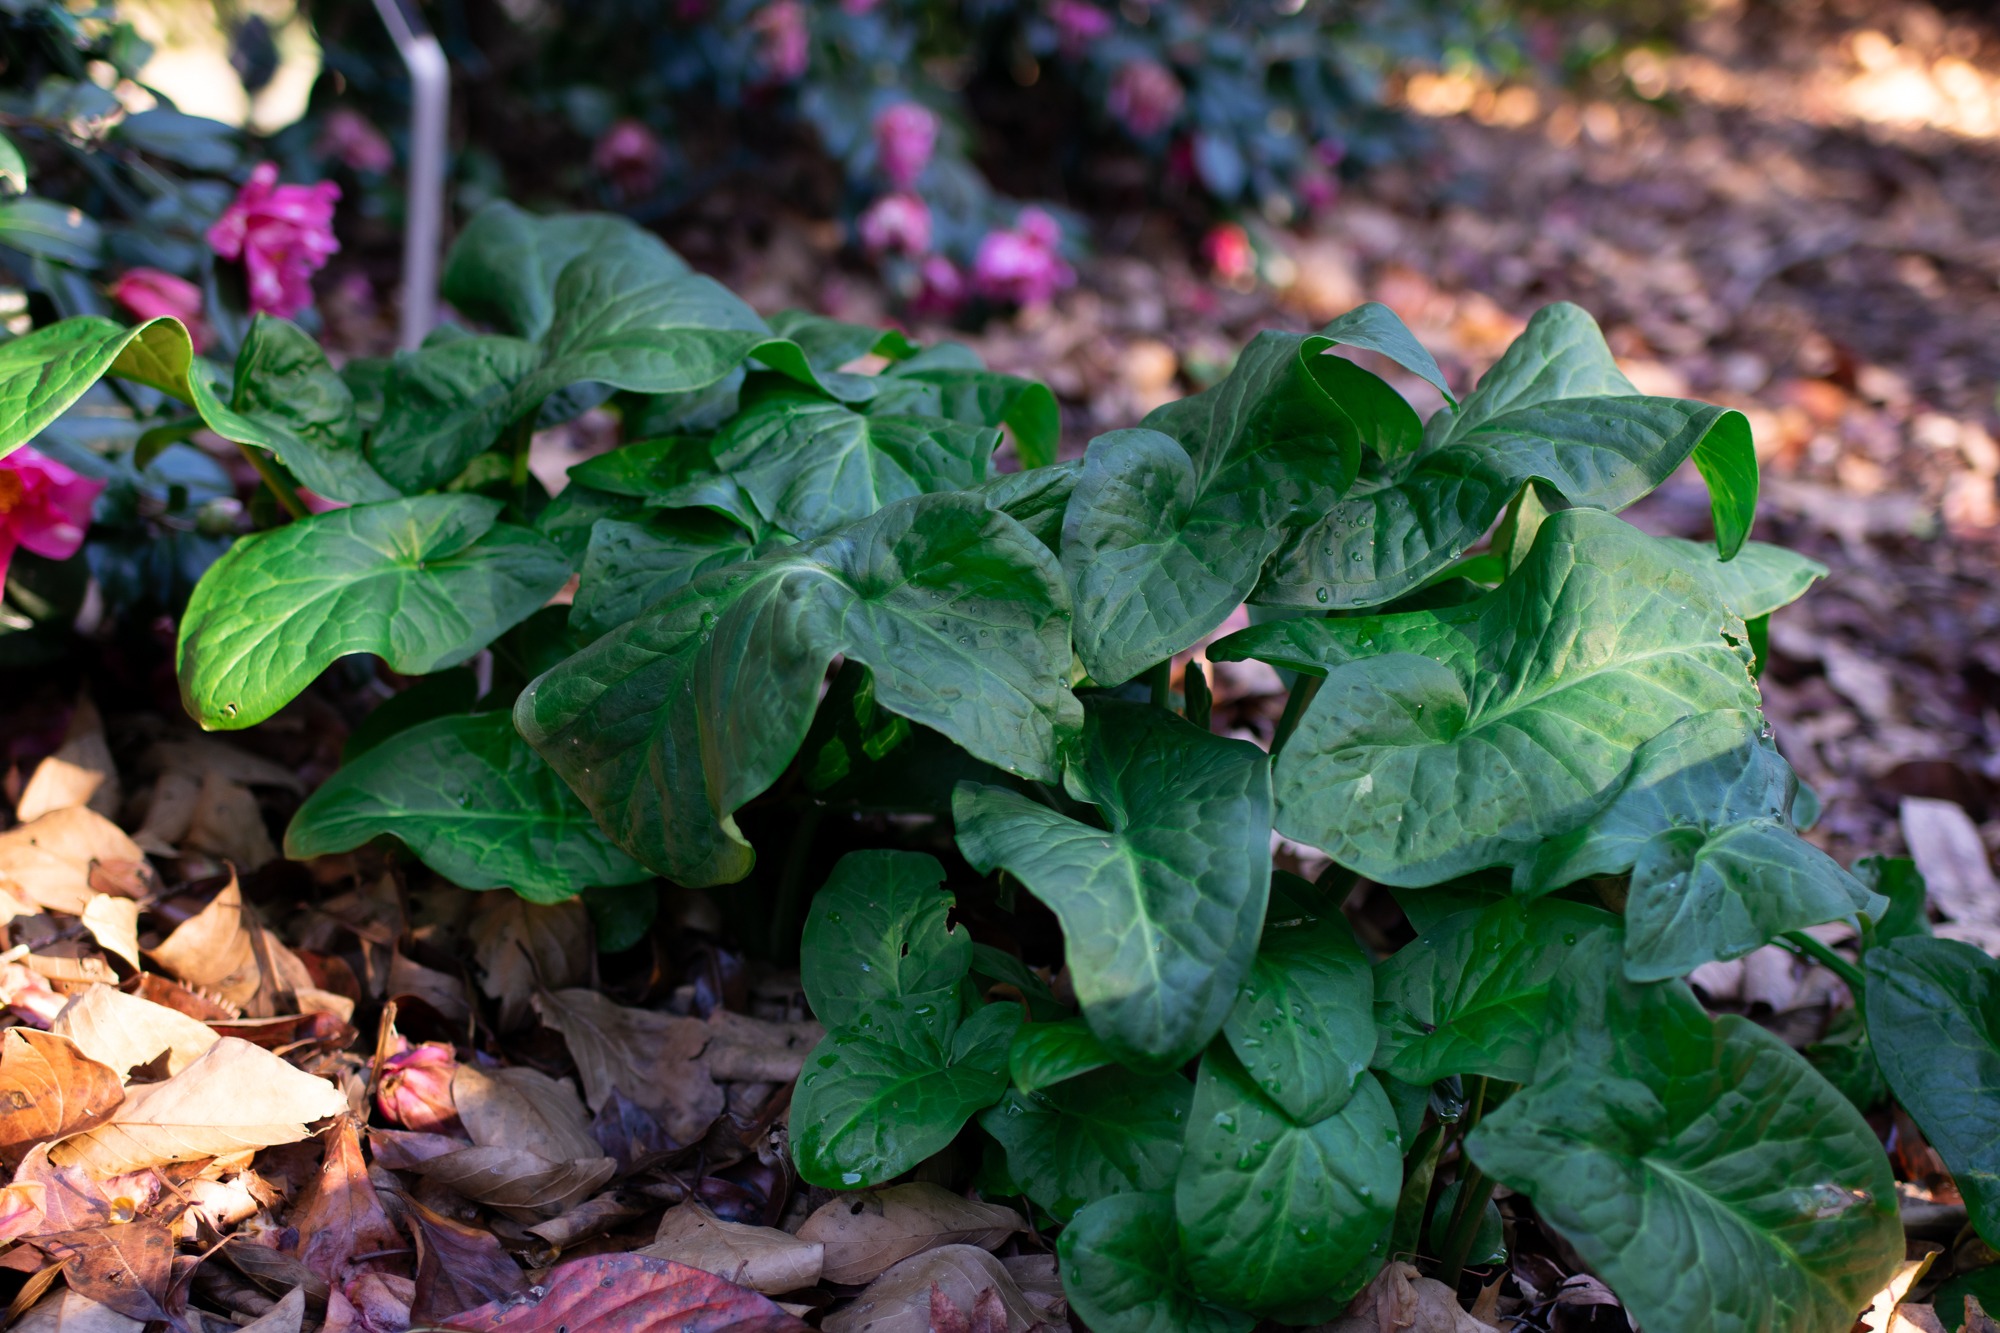 Italian arum patch during fall